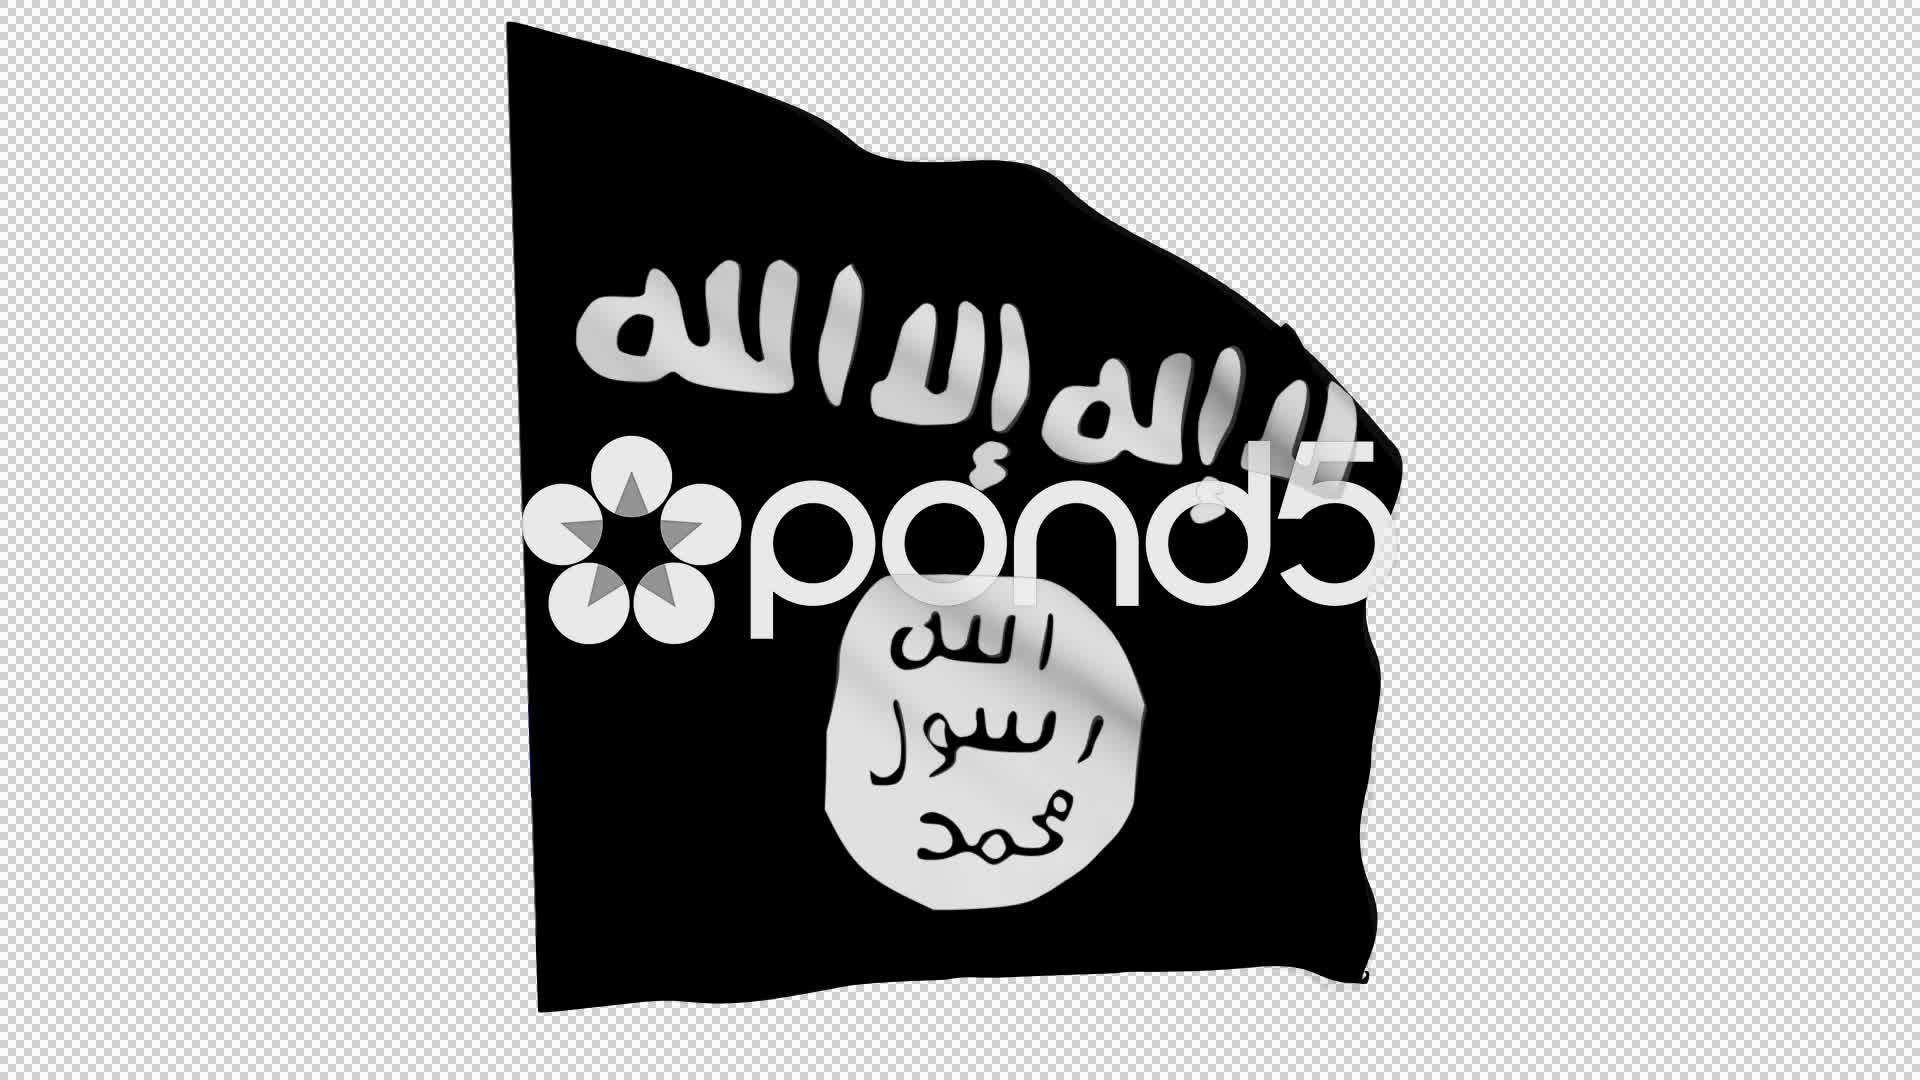 Flag Animation White Alpha Islamic State Of Iraq And The Levant